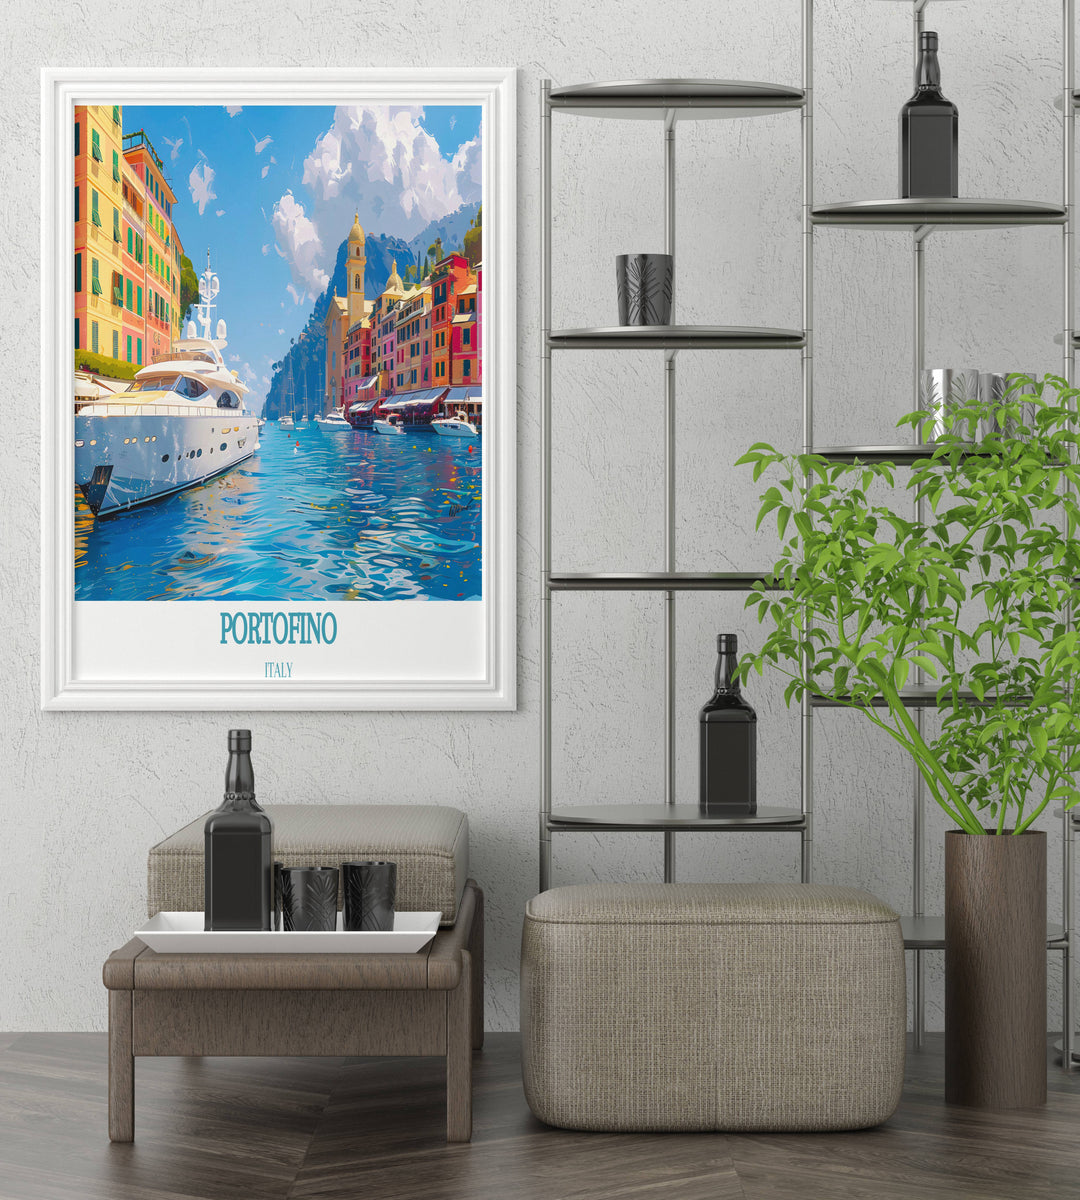 Stunning Portofino Gallery Wall Art capturing the vibrant charm and elegance of the Italian Riviera, perfect for adding a touch of Italy to your home decor.